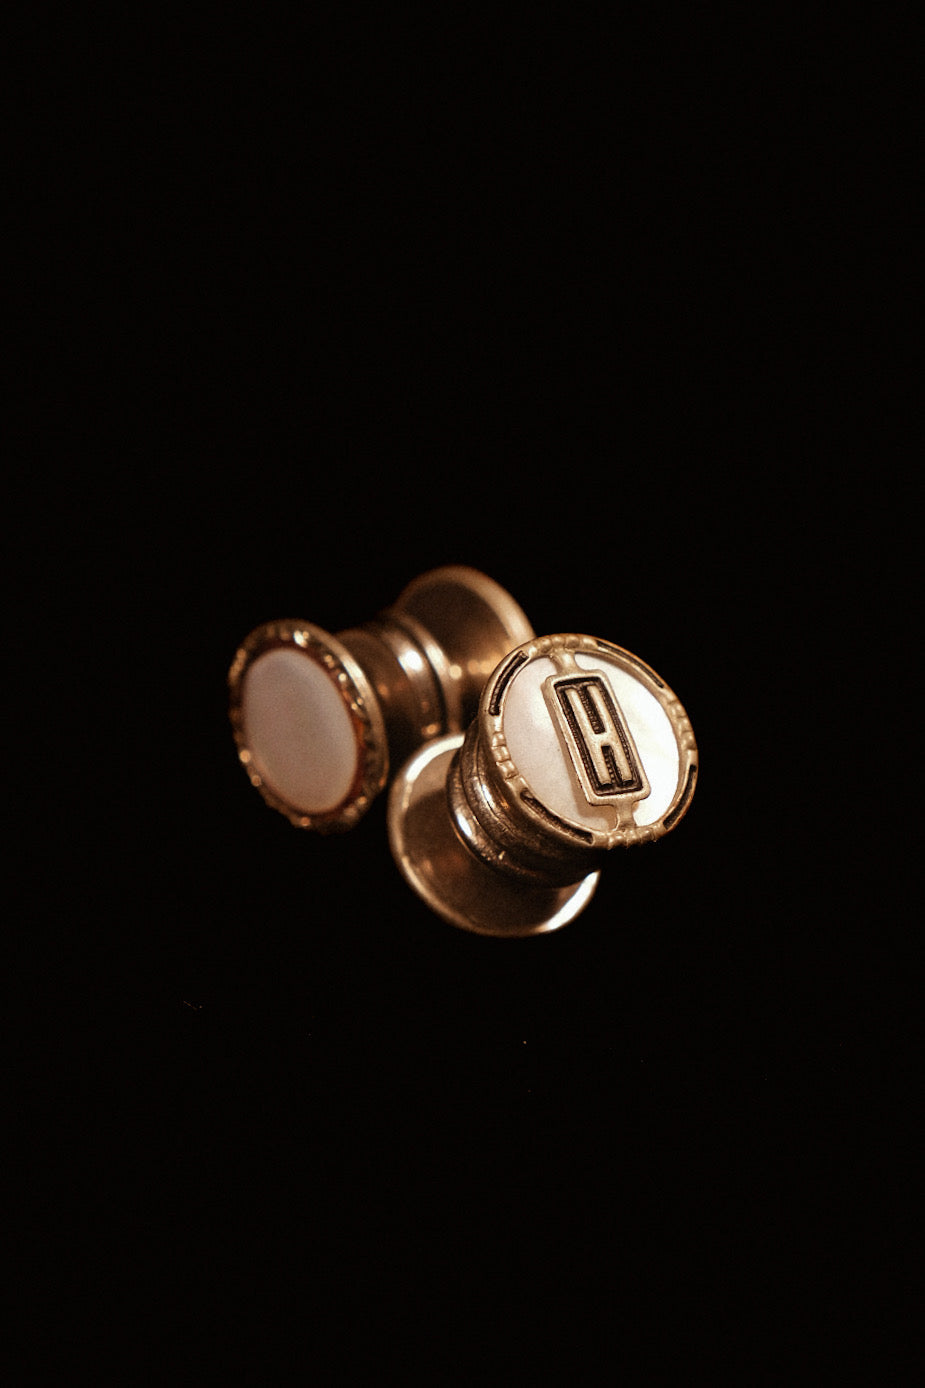 Authentic 1920s Snap Cufflinks With Mother Of Pearl Face & Enitial "H"